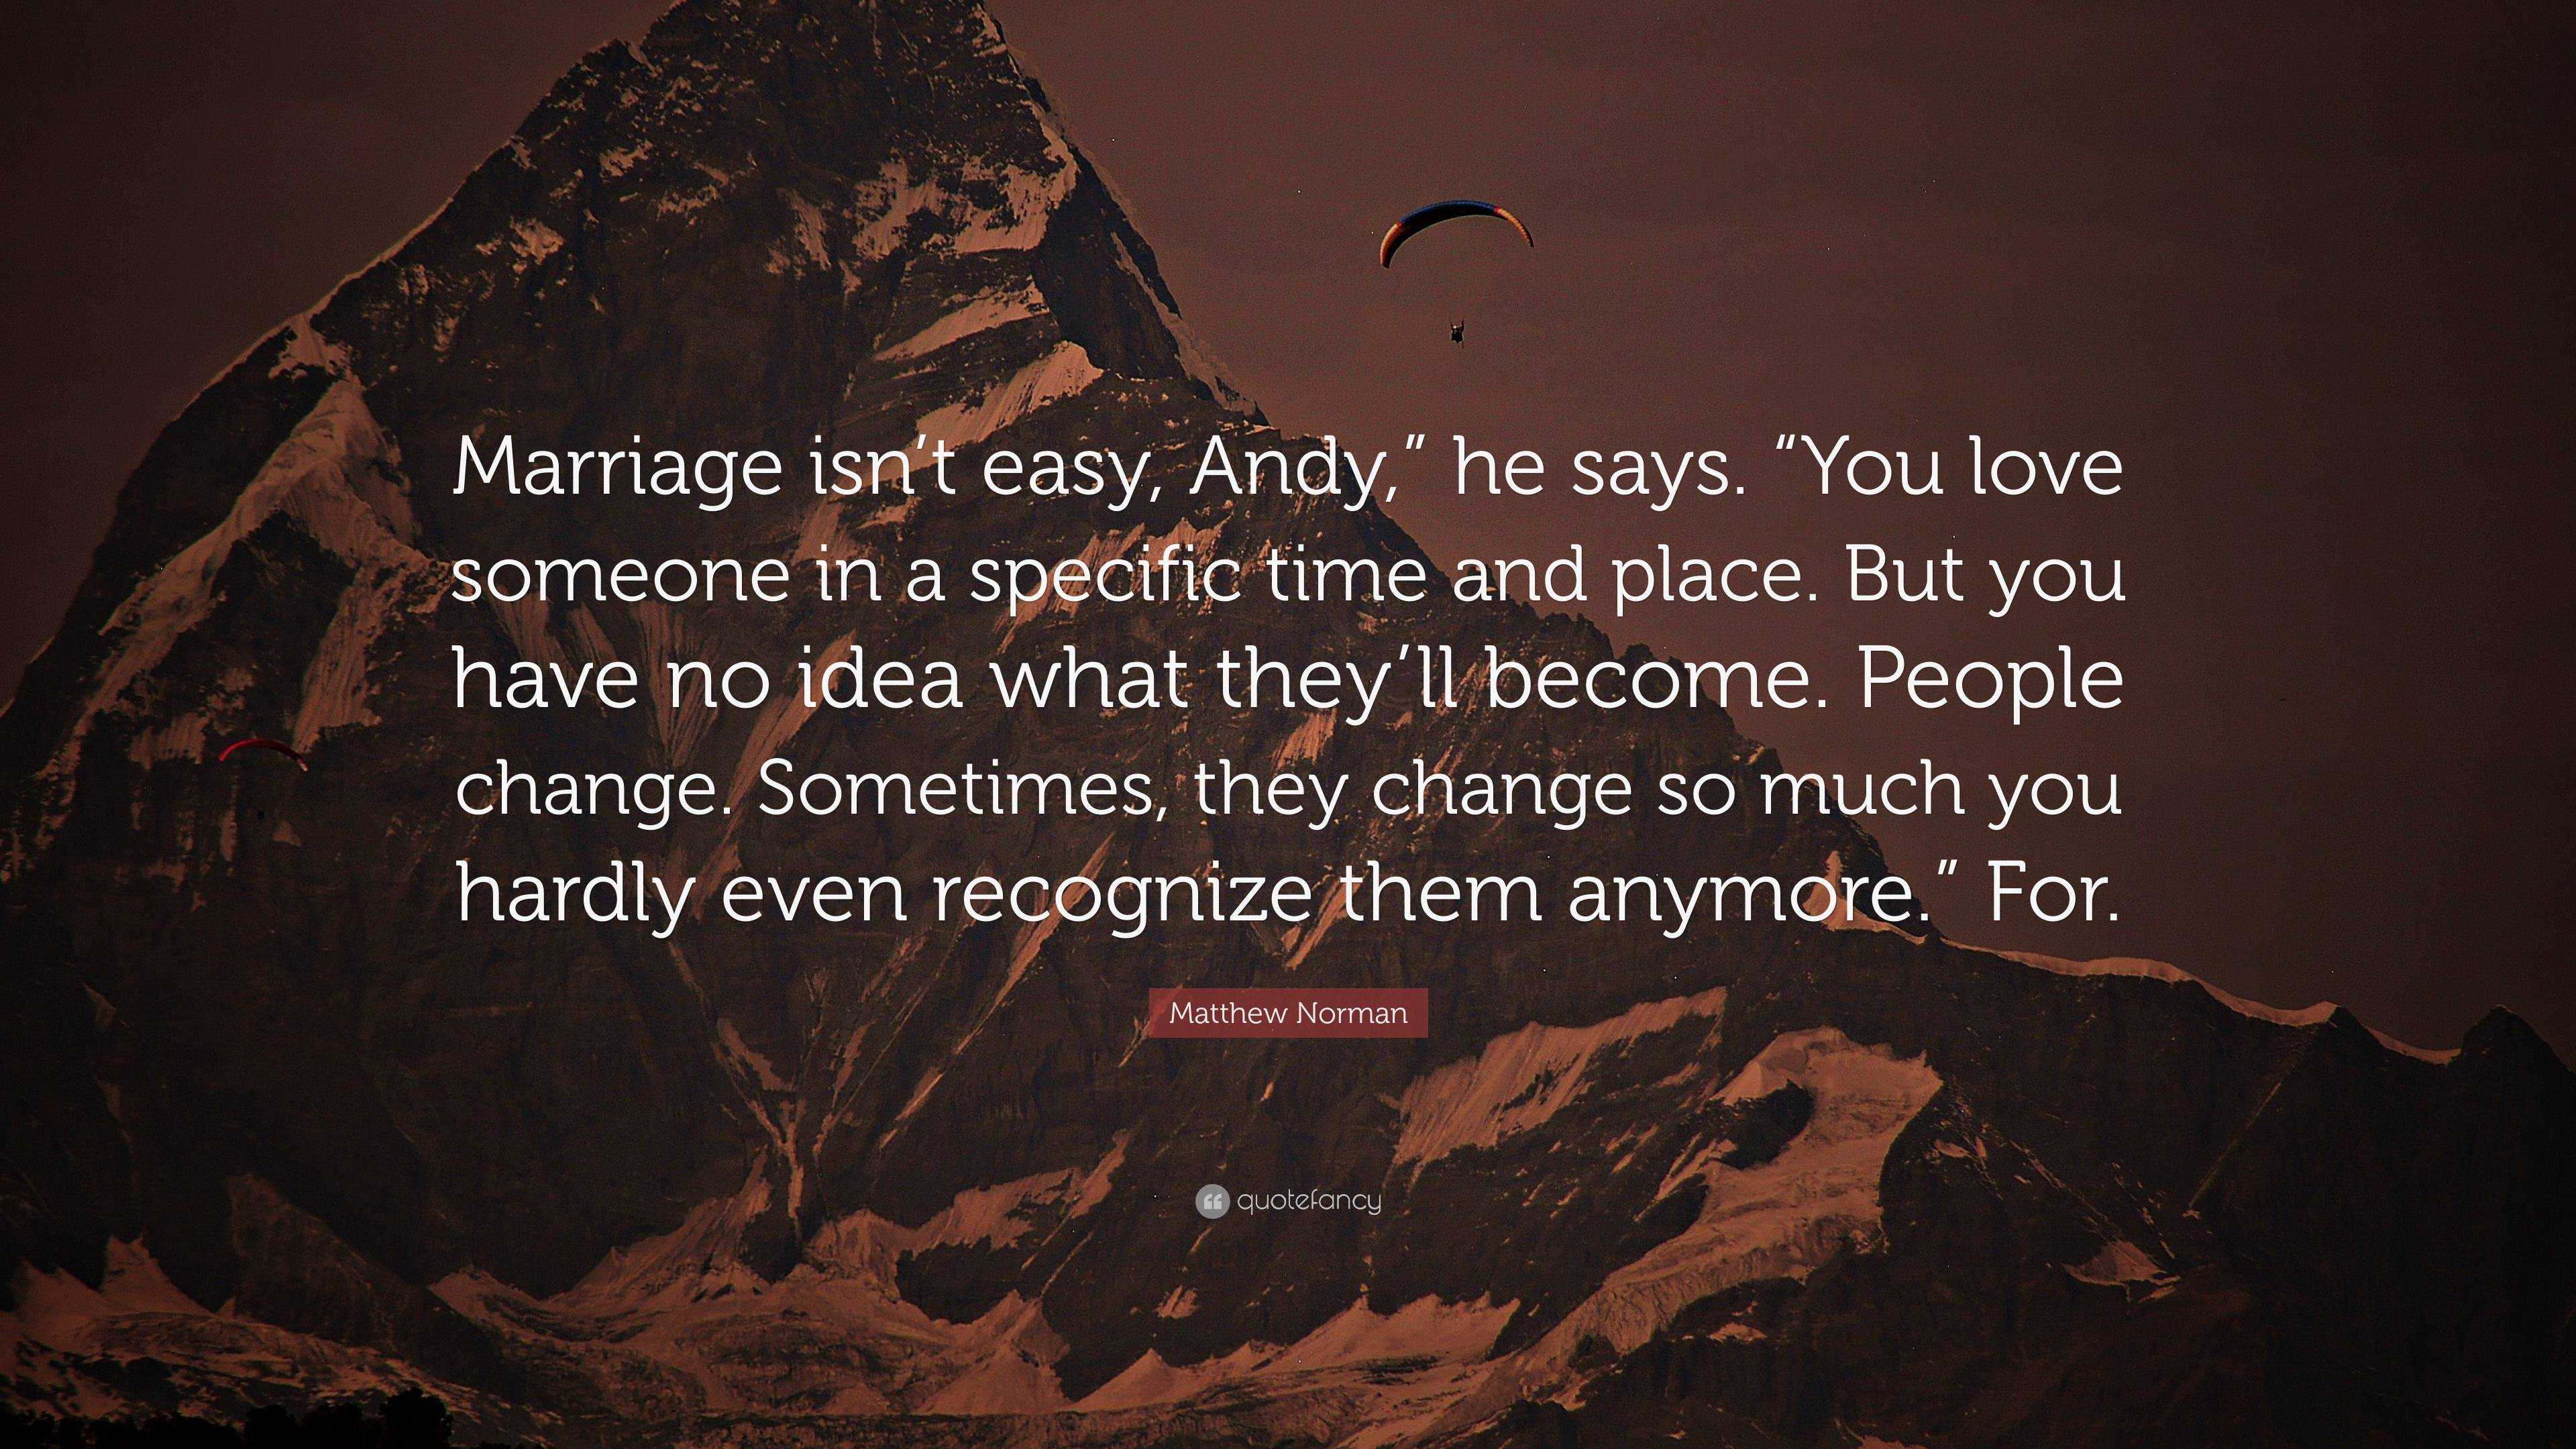 Isn t easy quotes marriage Top 78